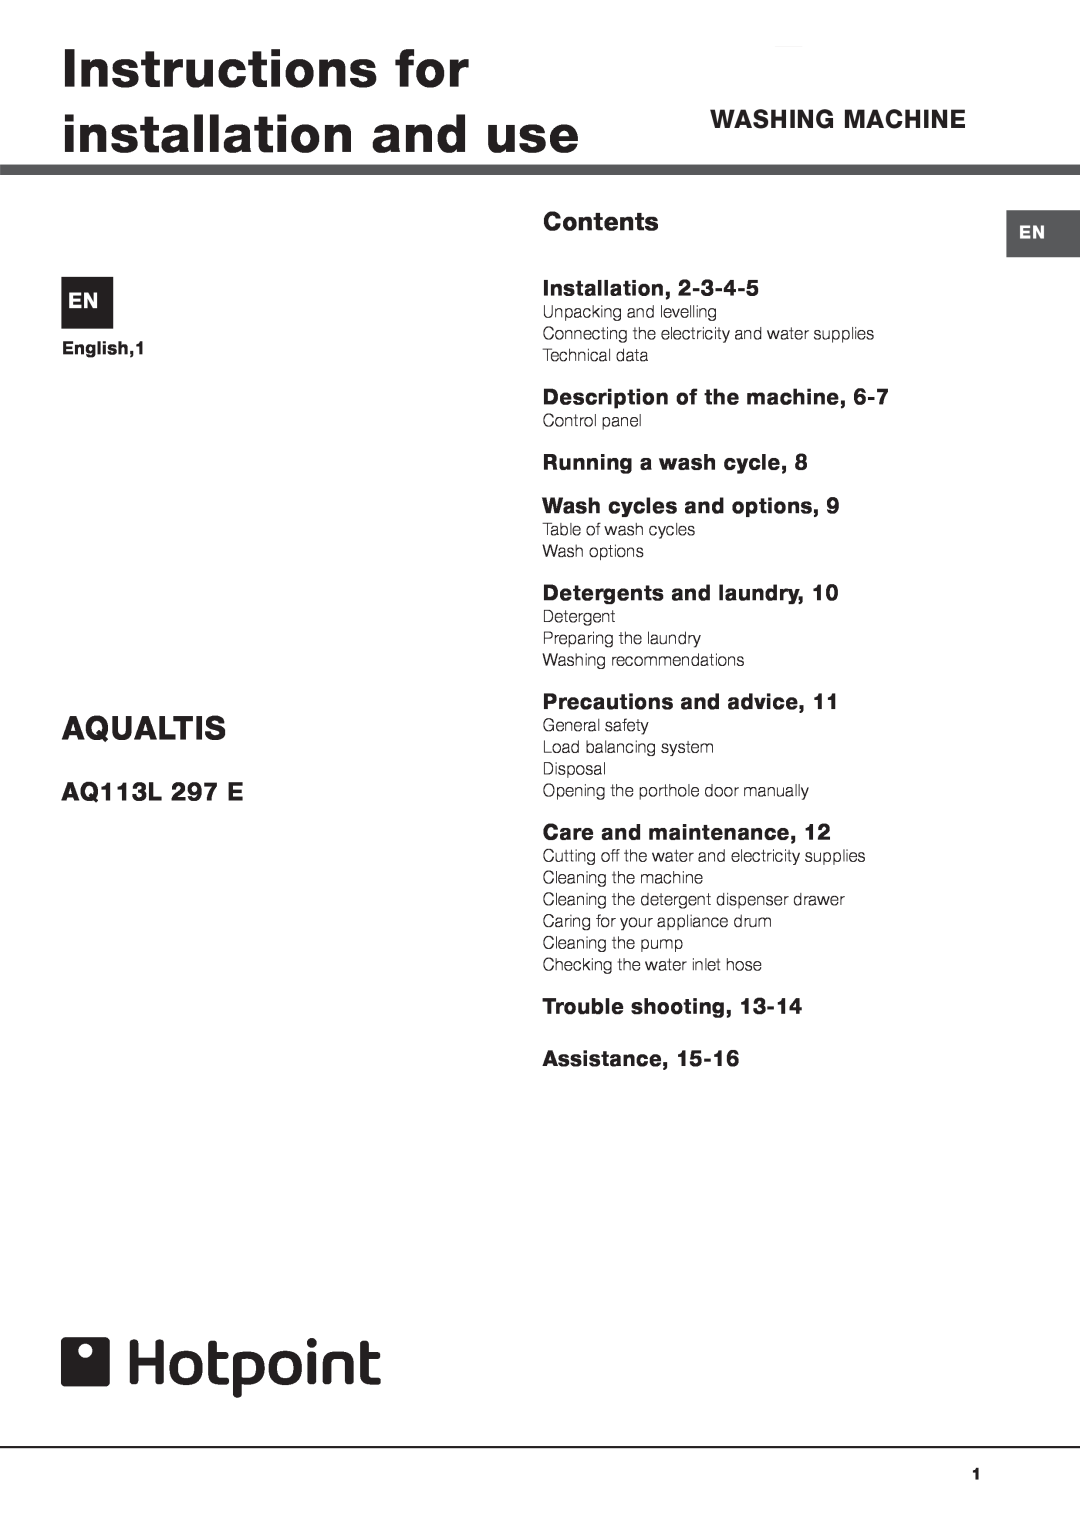 Hotpoint AQ113L 297 E manual Instructions for installation and use, Aqualtis, Installation, Description of the machine 